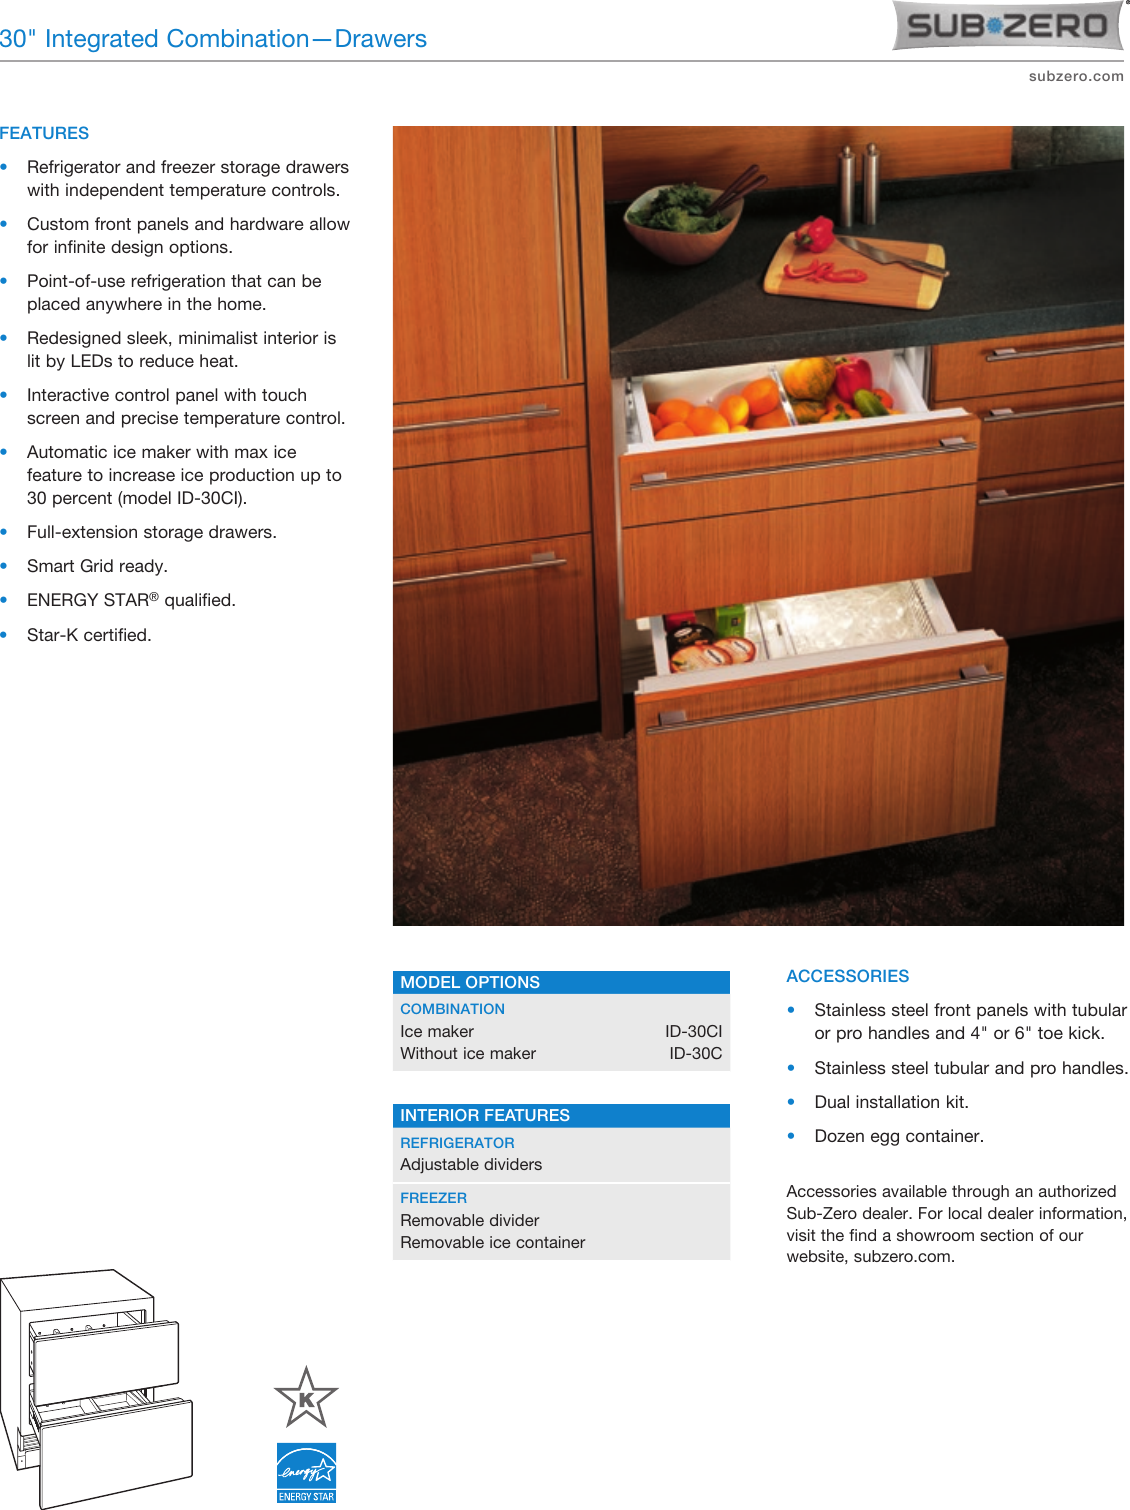 Subzero Wolf Id 30ci Combination Drawers Quick Reference Guide